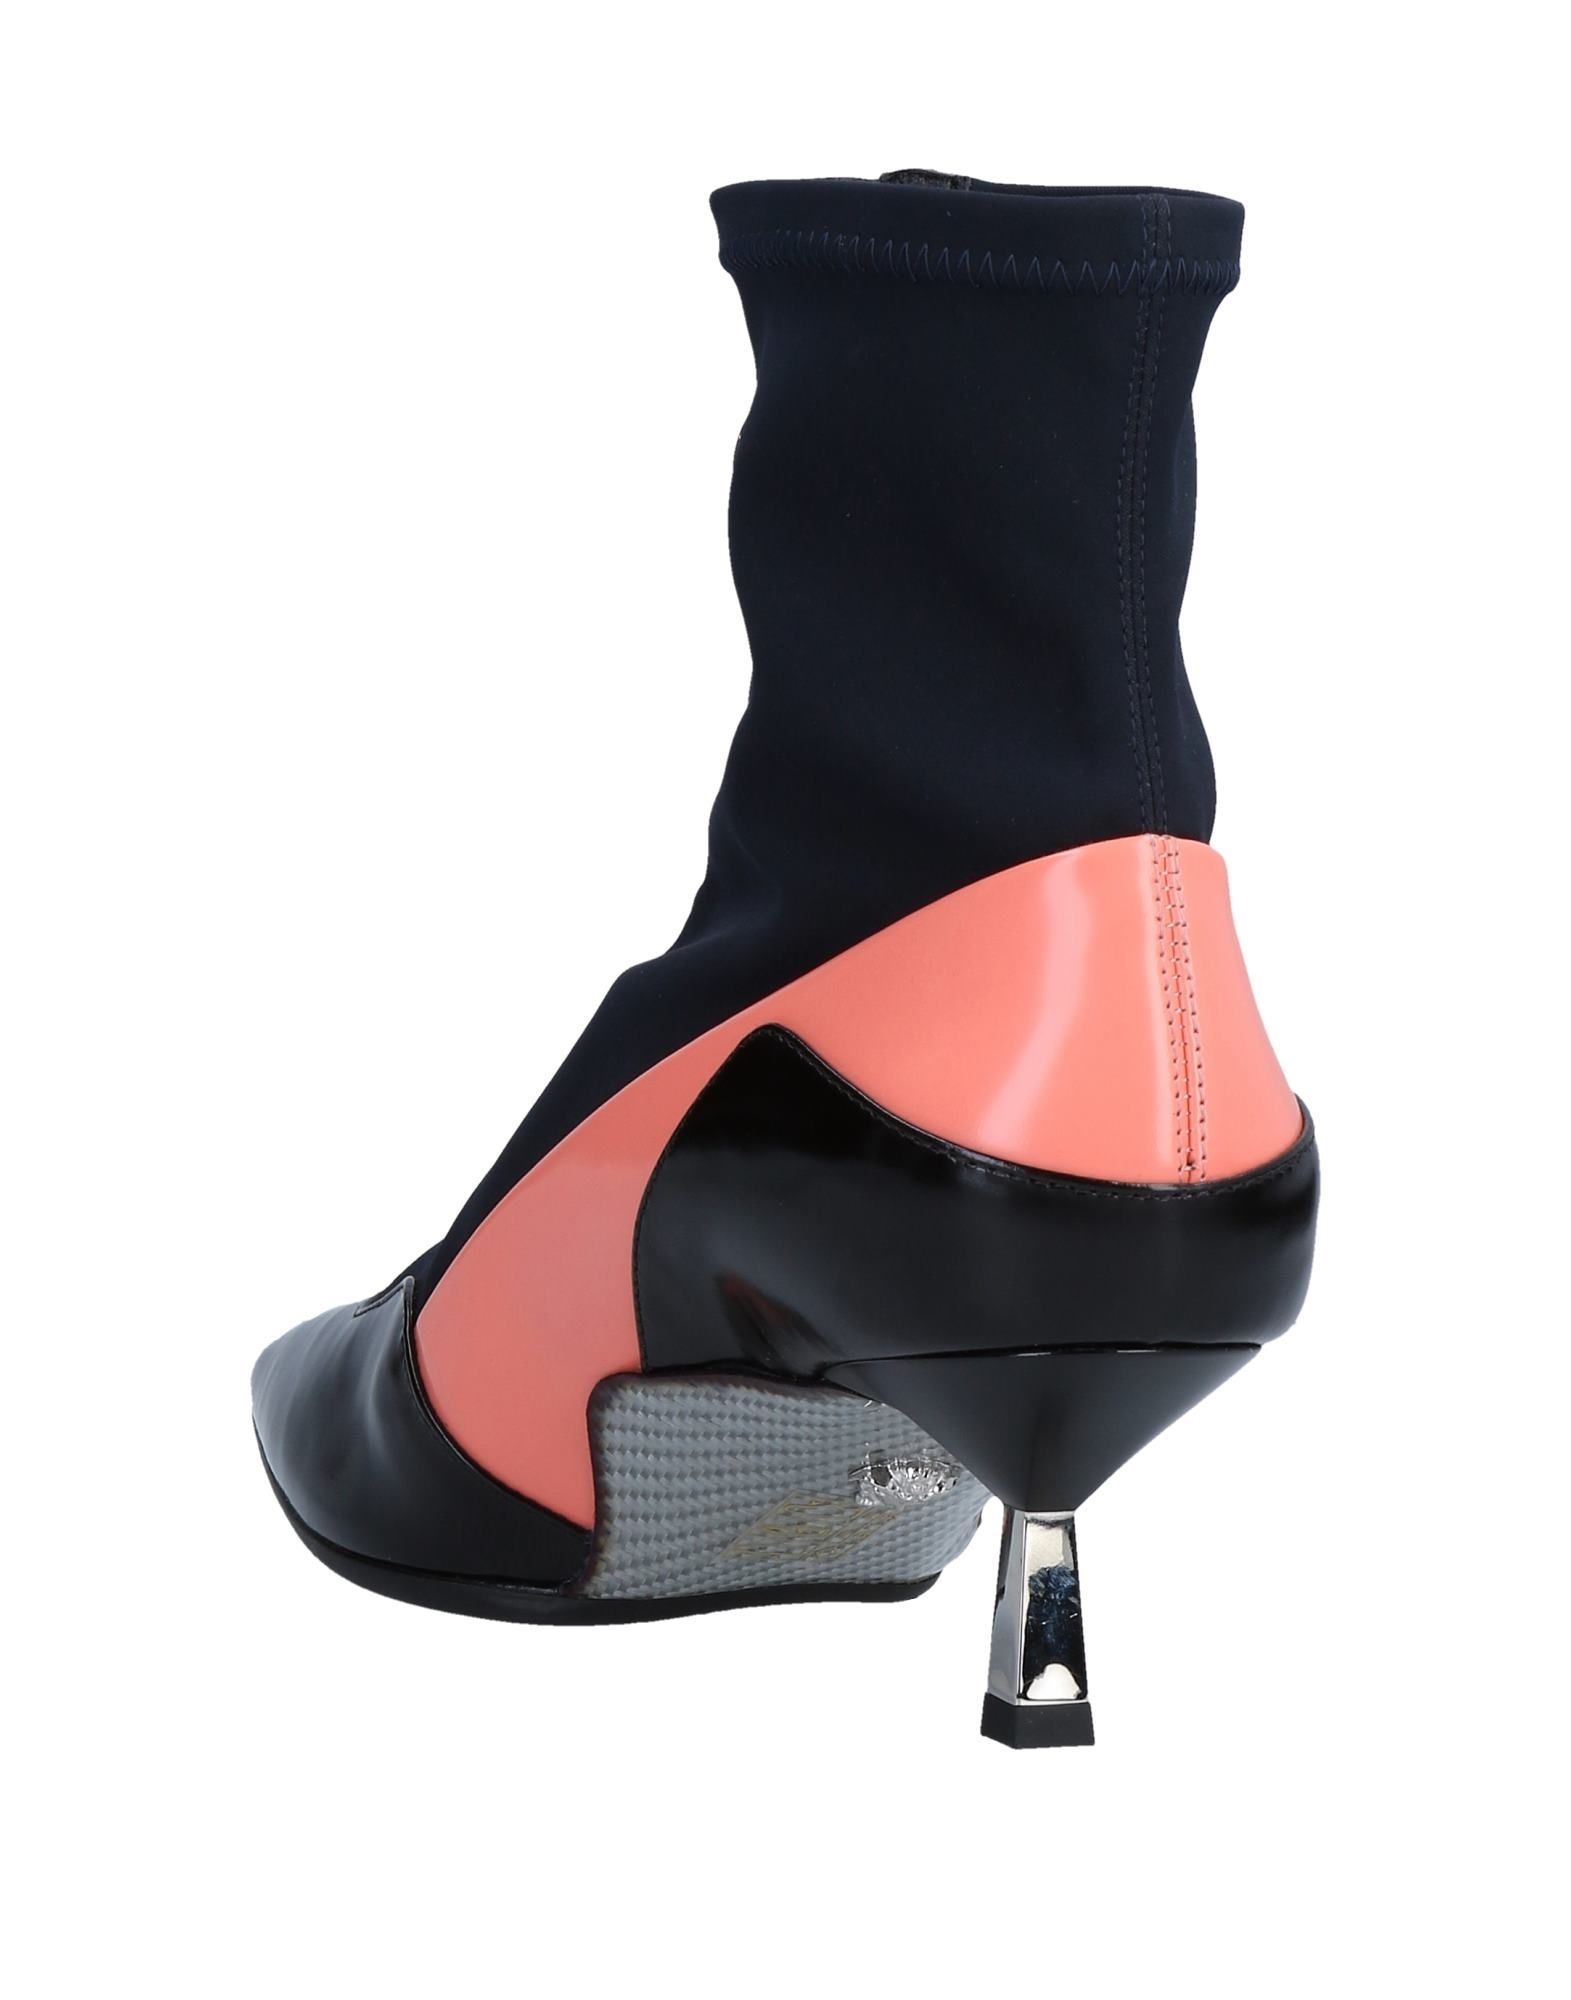 neoprene, leather, polished leather, metal applications, multicolour pattern, zip, narrow toeline, sculpted heel, unlined, rubber sole, contains non-textile parts of animal origin